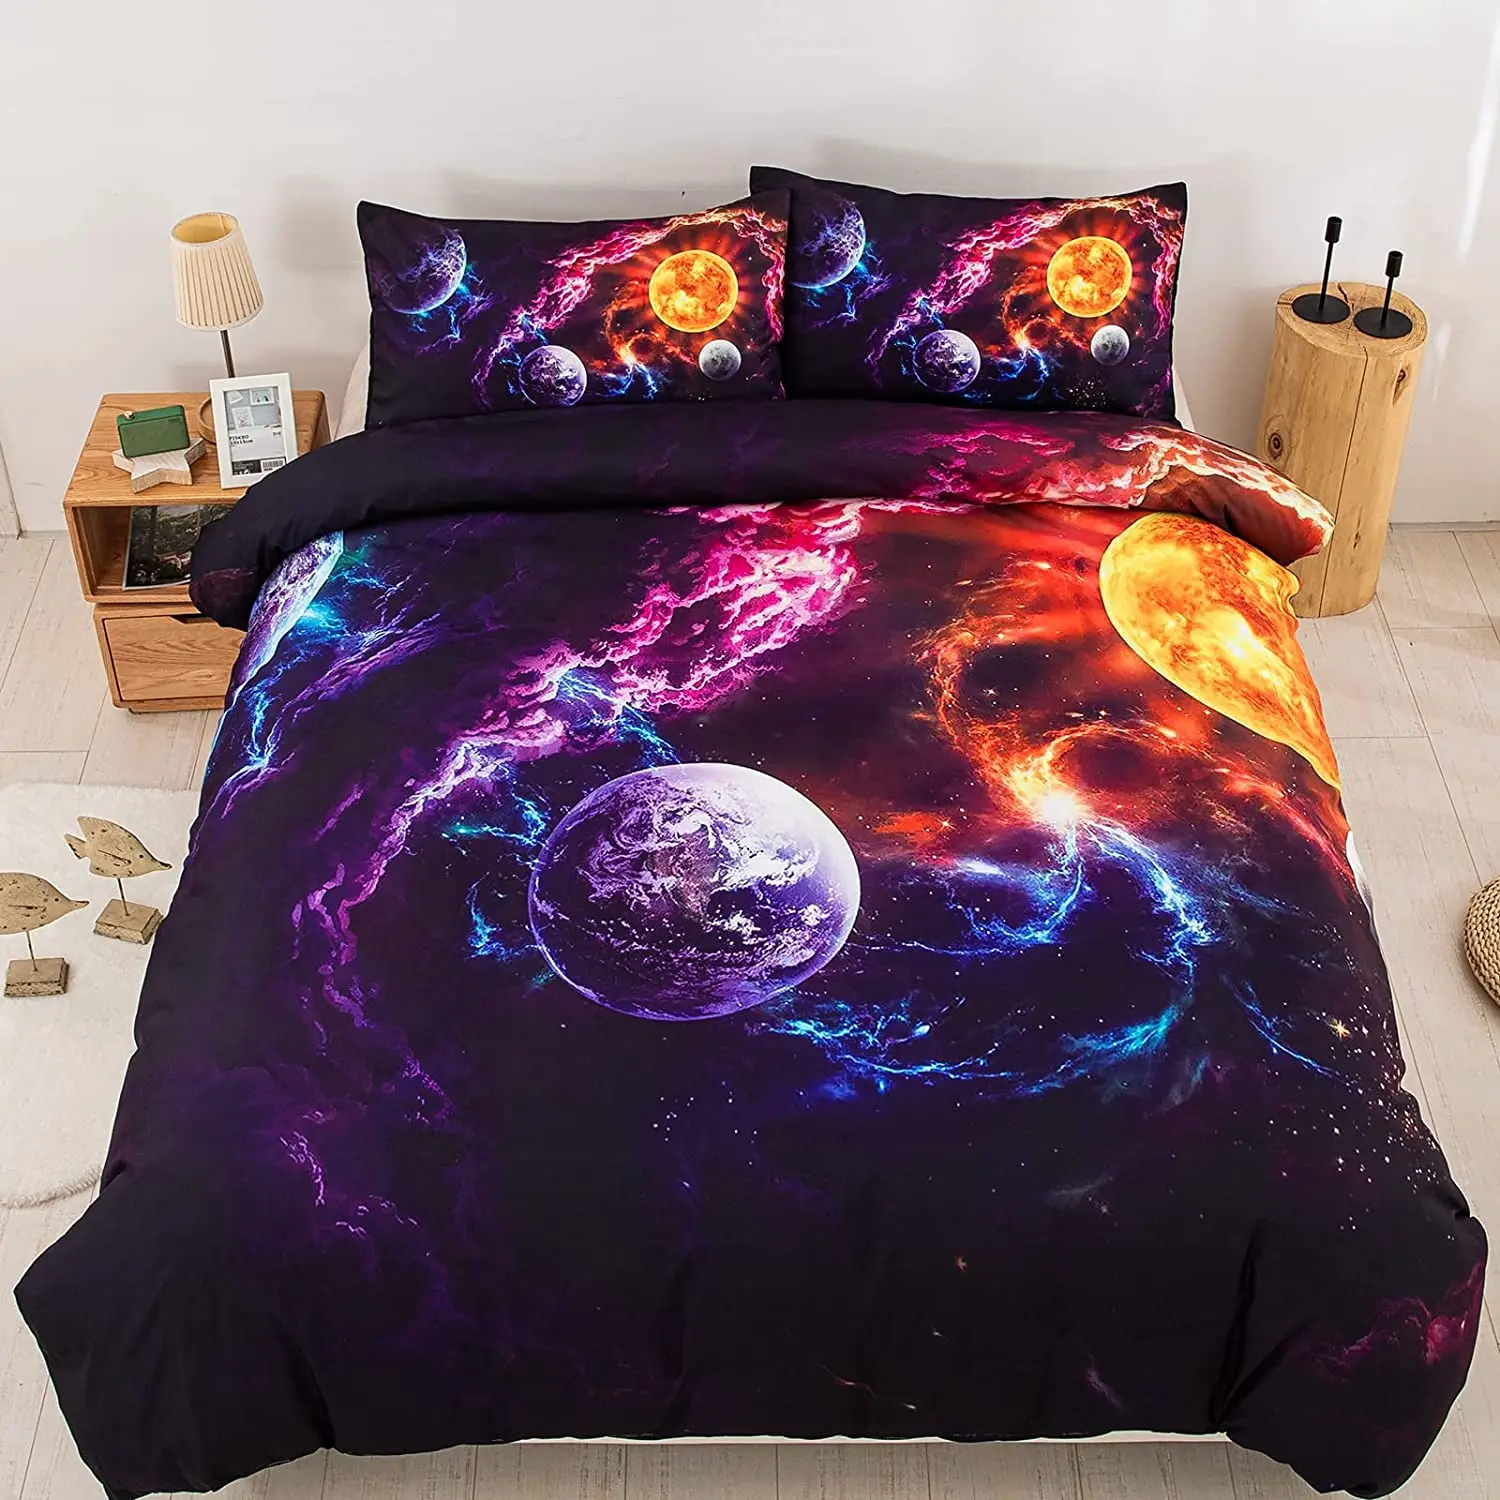 

Galaxy Space Bedding Set Universe Planet Printed Duvet Cover Soft Microfiber Queen King Size Comforter Cover with Pillowcases